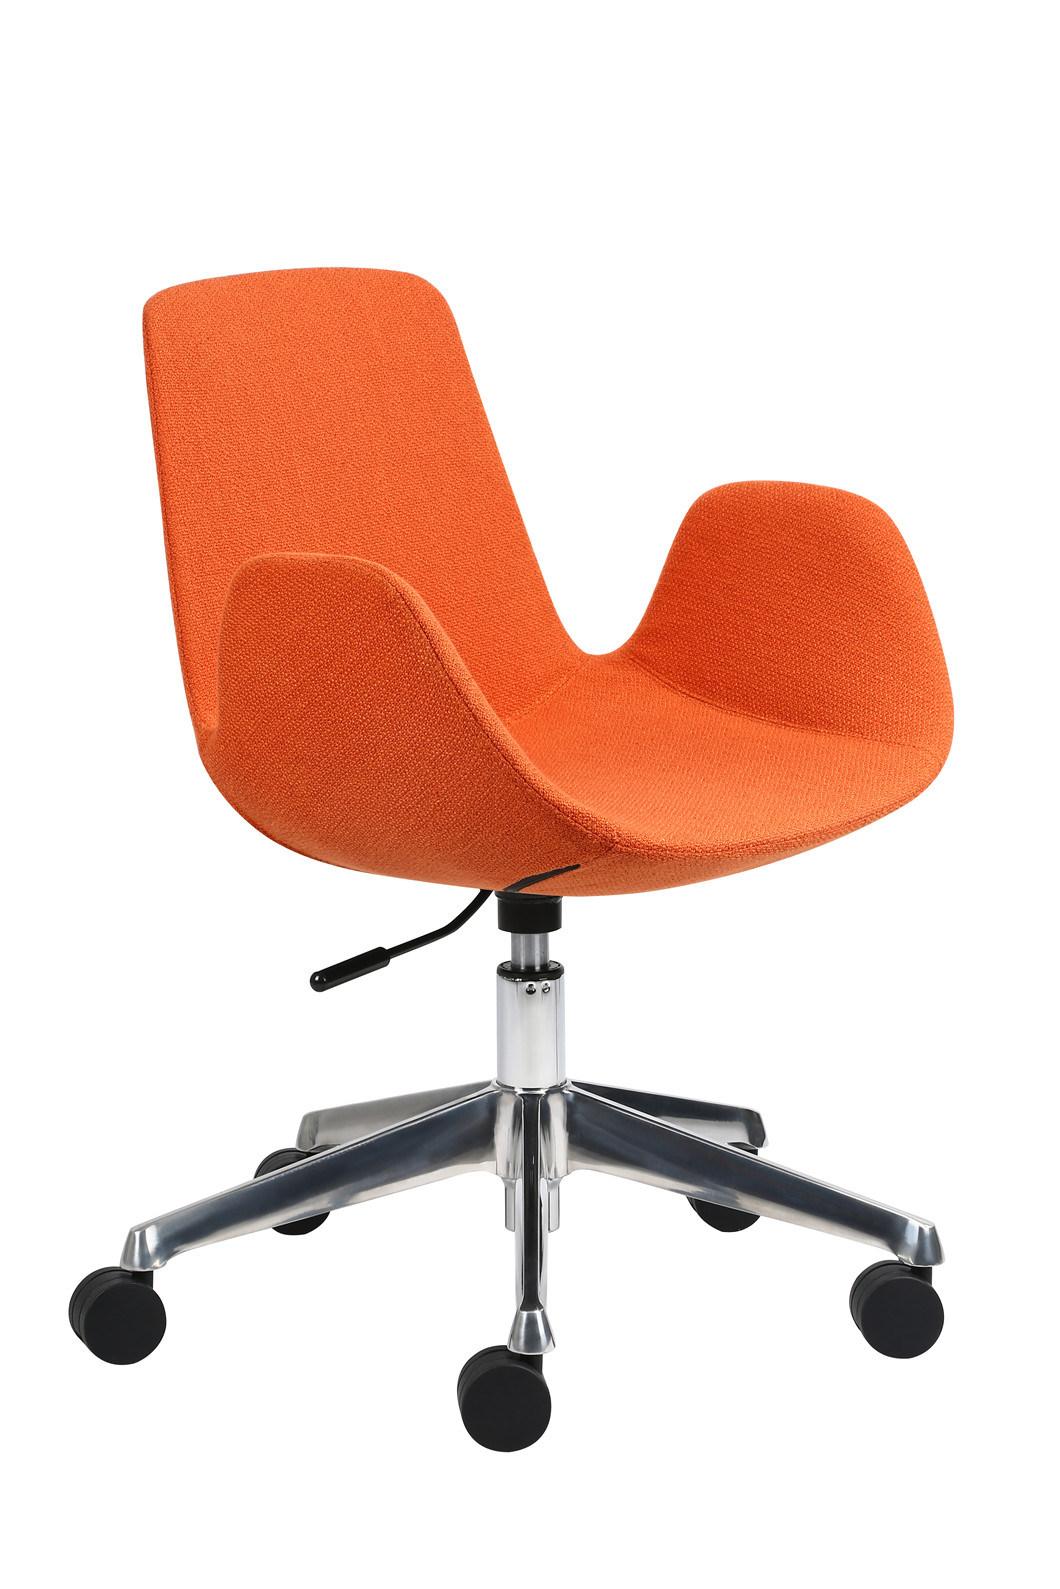 Multipurpose Leisure Lounge Conference Meeting Living Room Seating Swivel Home Office Chair